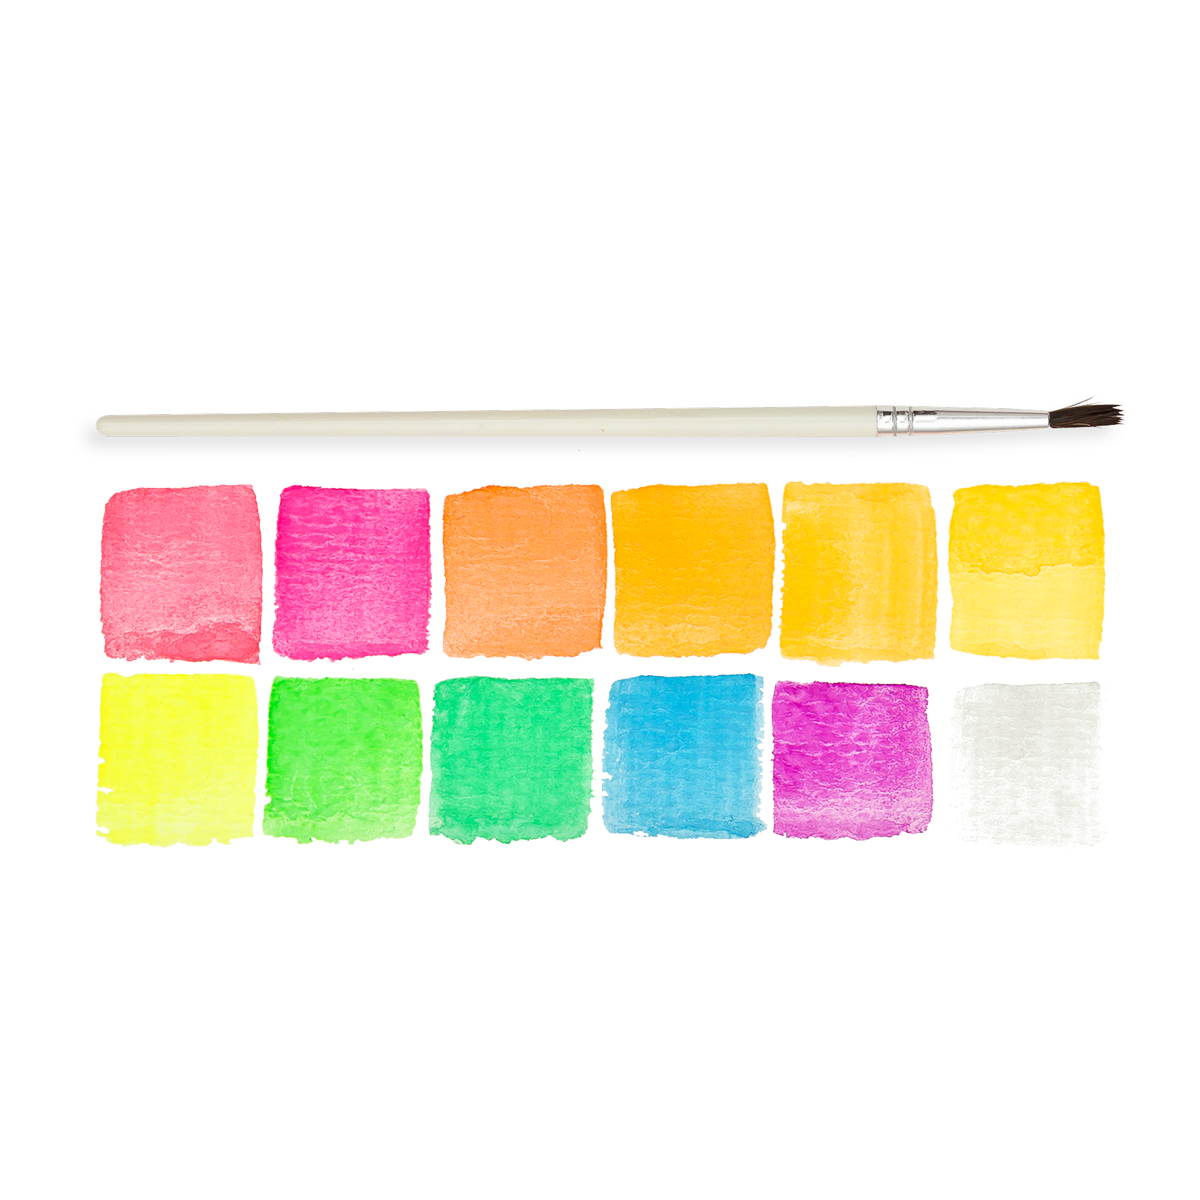 Chroma Blends Neon Watercolor Set color swatches and brush